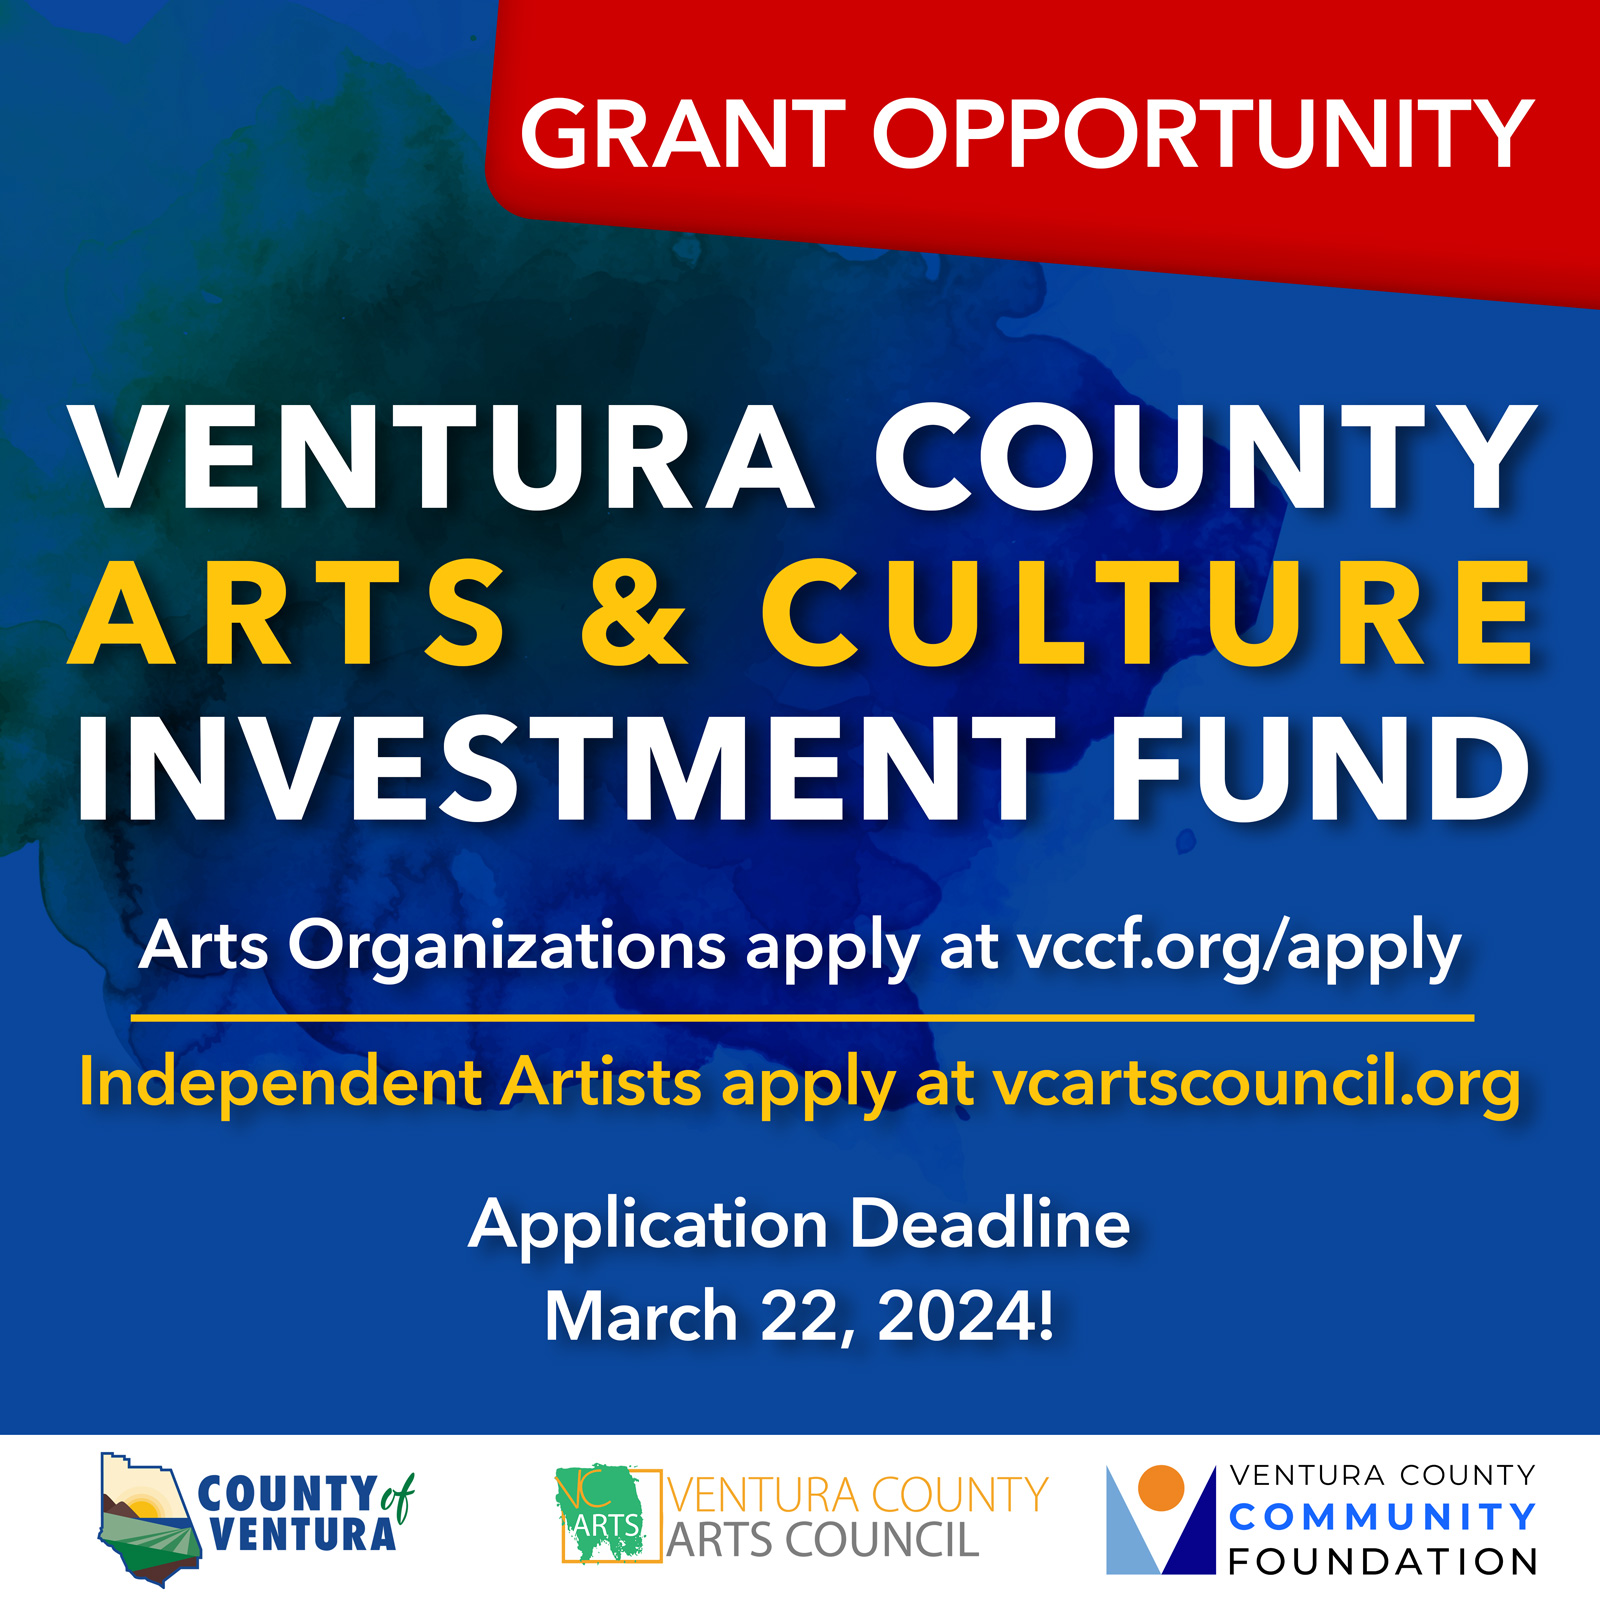 VENTURA COUNTY ARTS AND CULTURE INVESMENT FUND GRANT OPPORTUNITY